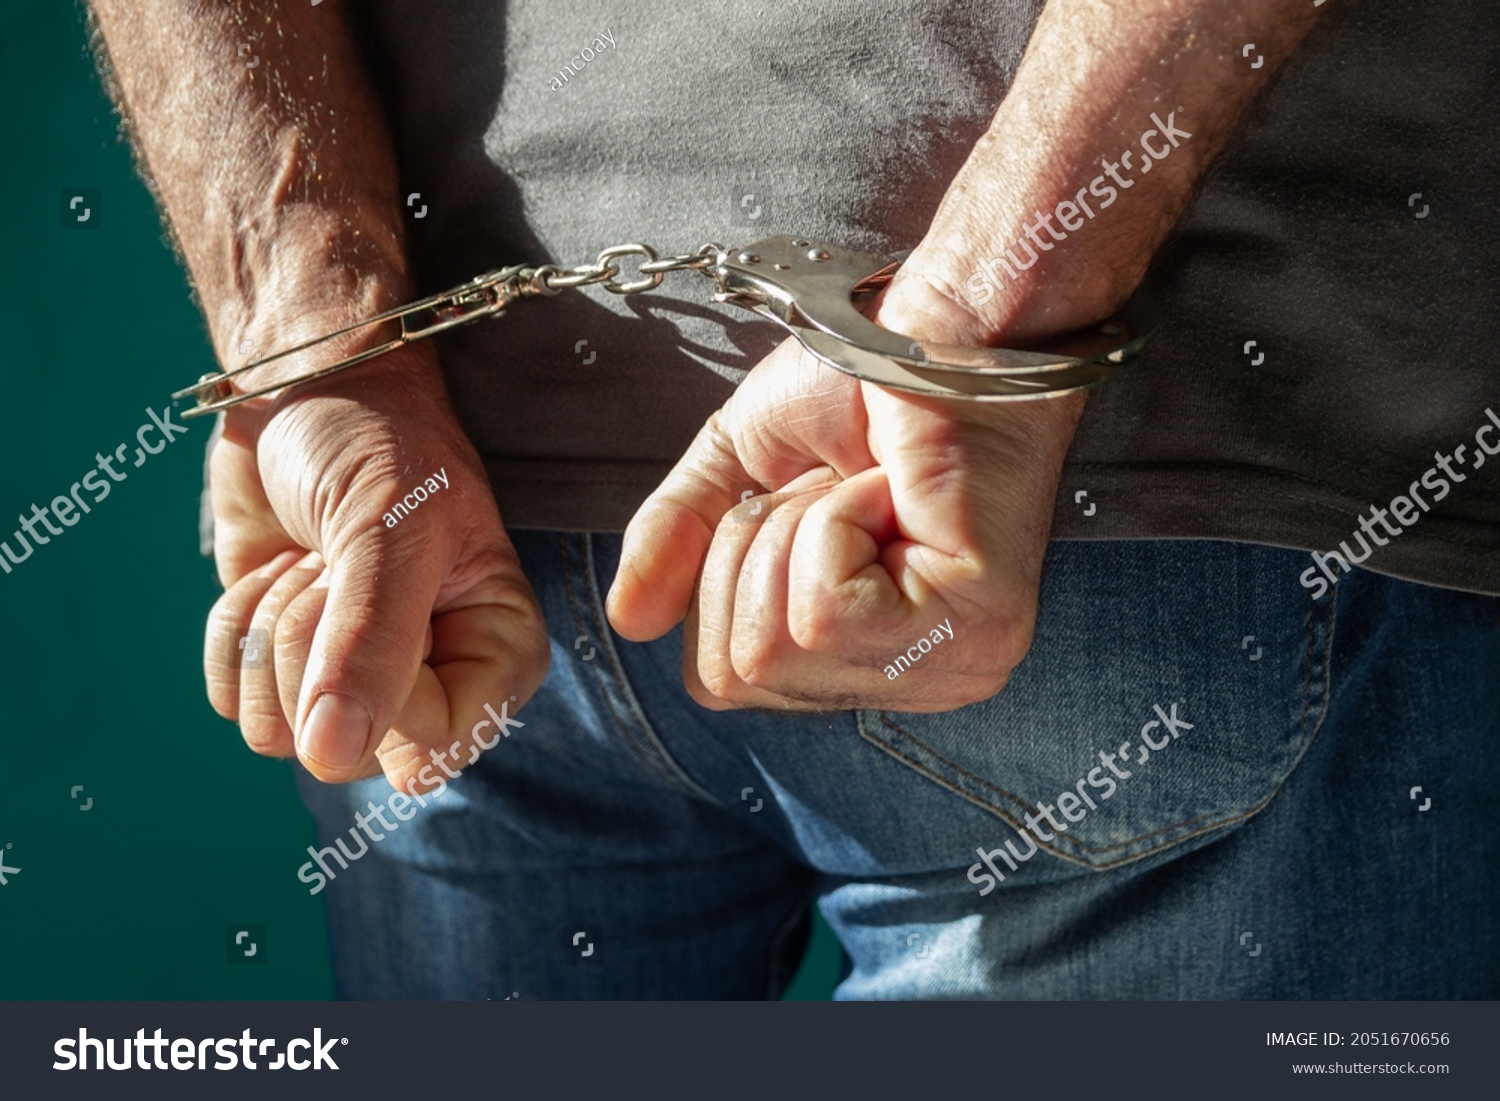 Detained man with hands behind his back. Cutaway view of a handcuffed man in jeans standing, human rights concept. #2051670656